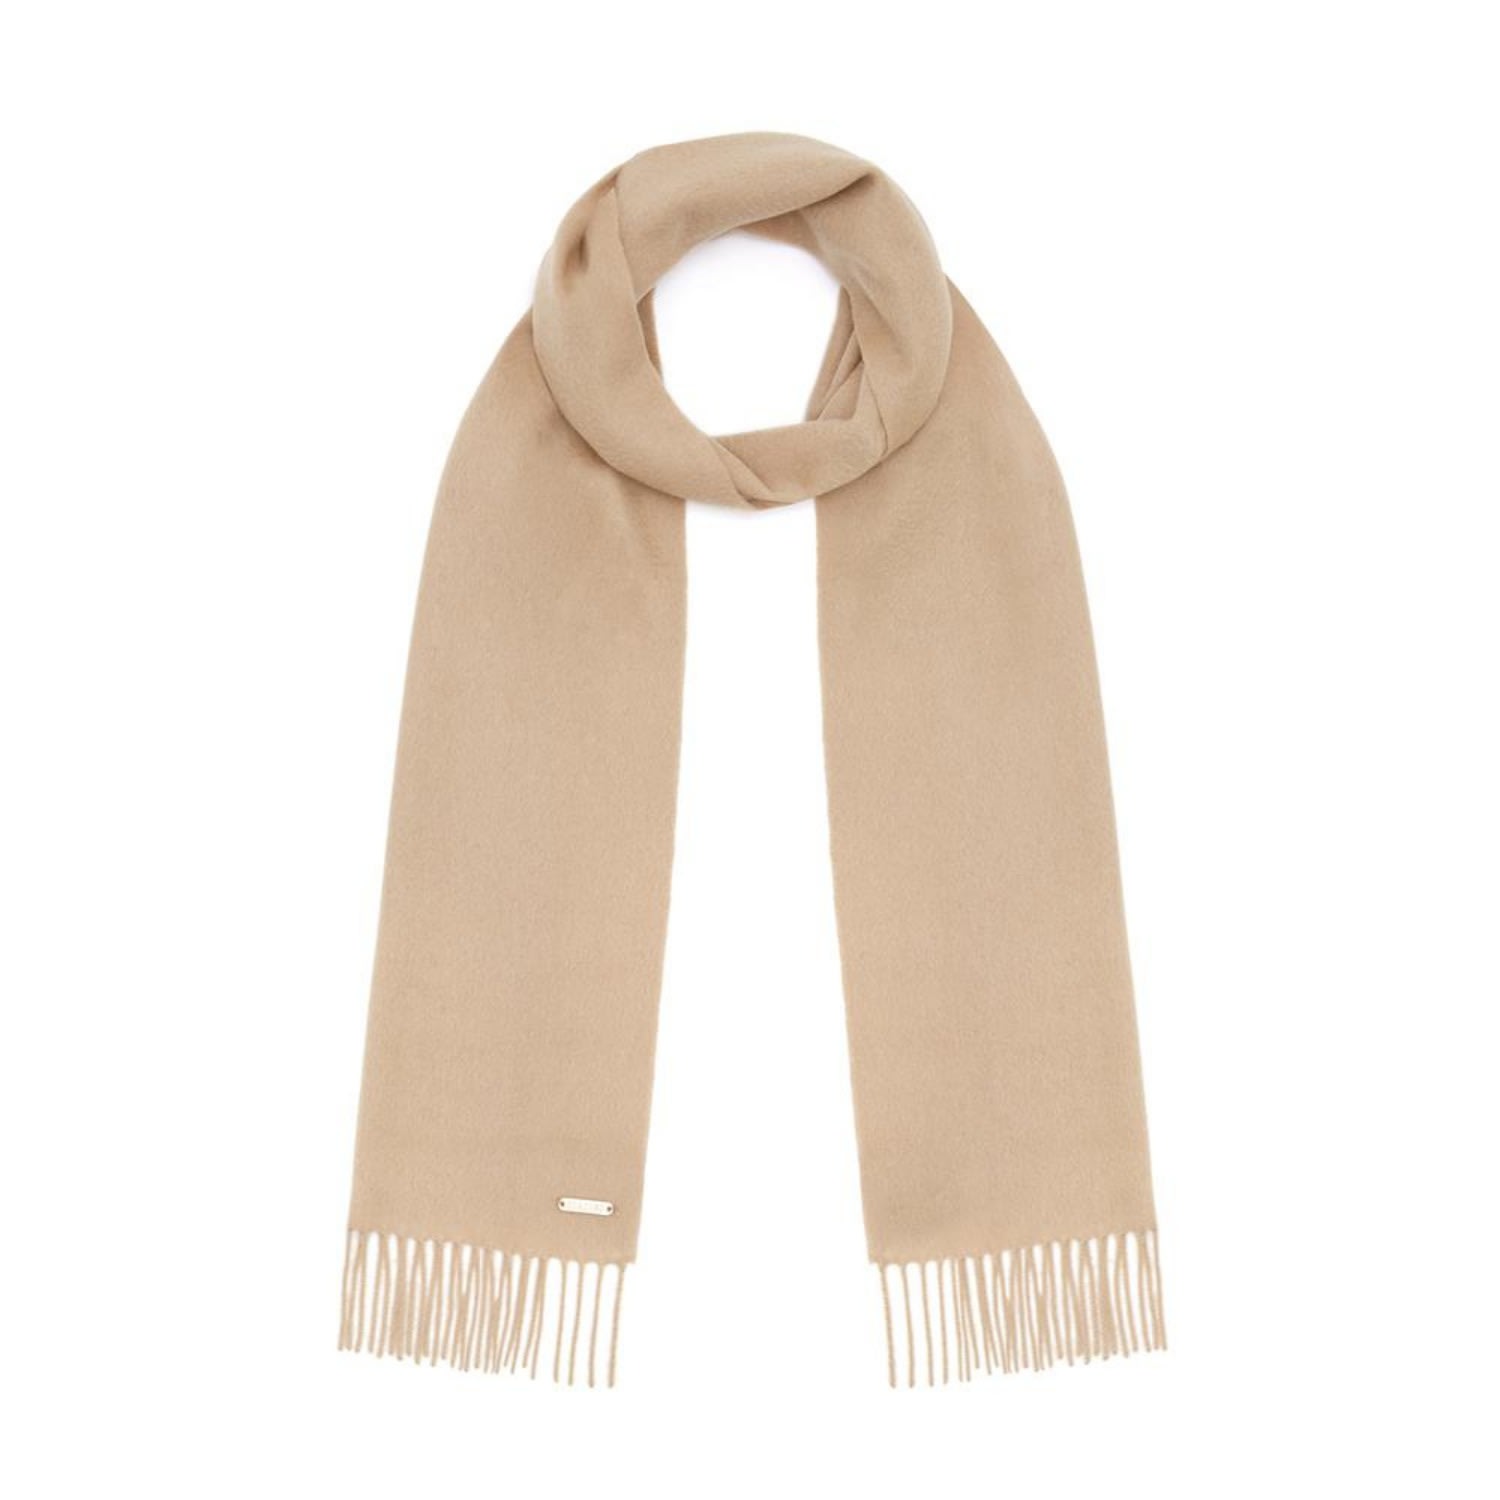 Hortons England Men's Windsor Cashmere Scarf - Neutrals In White